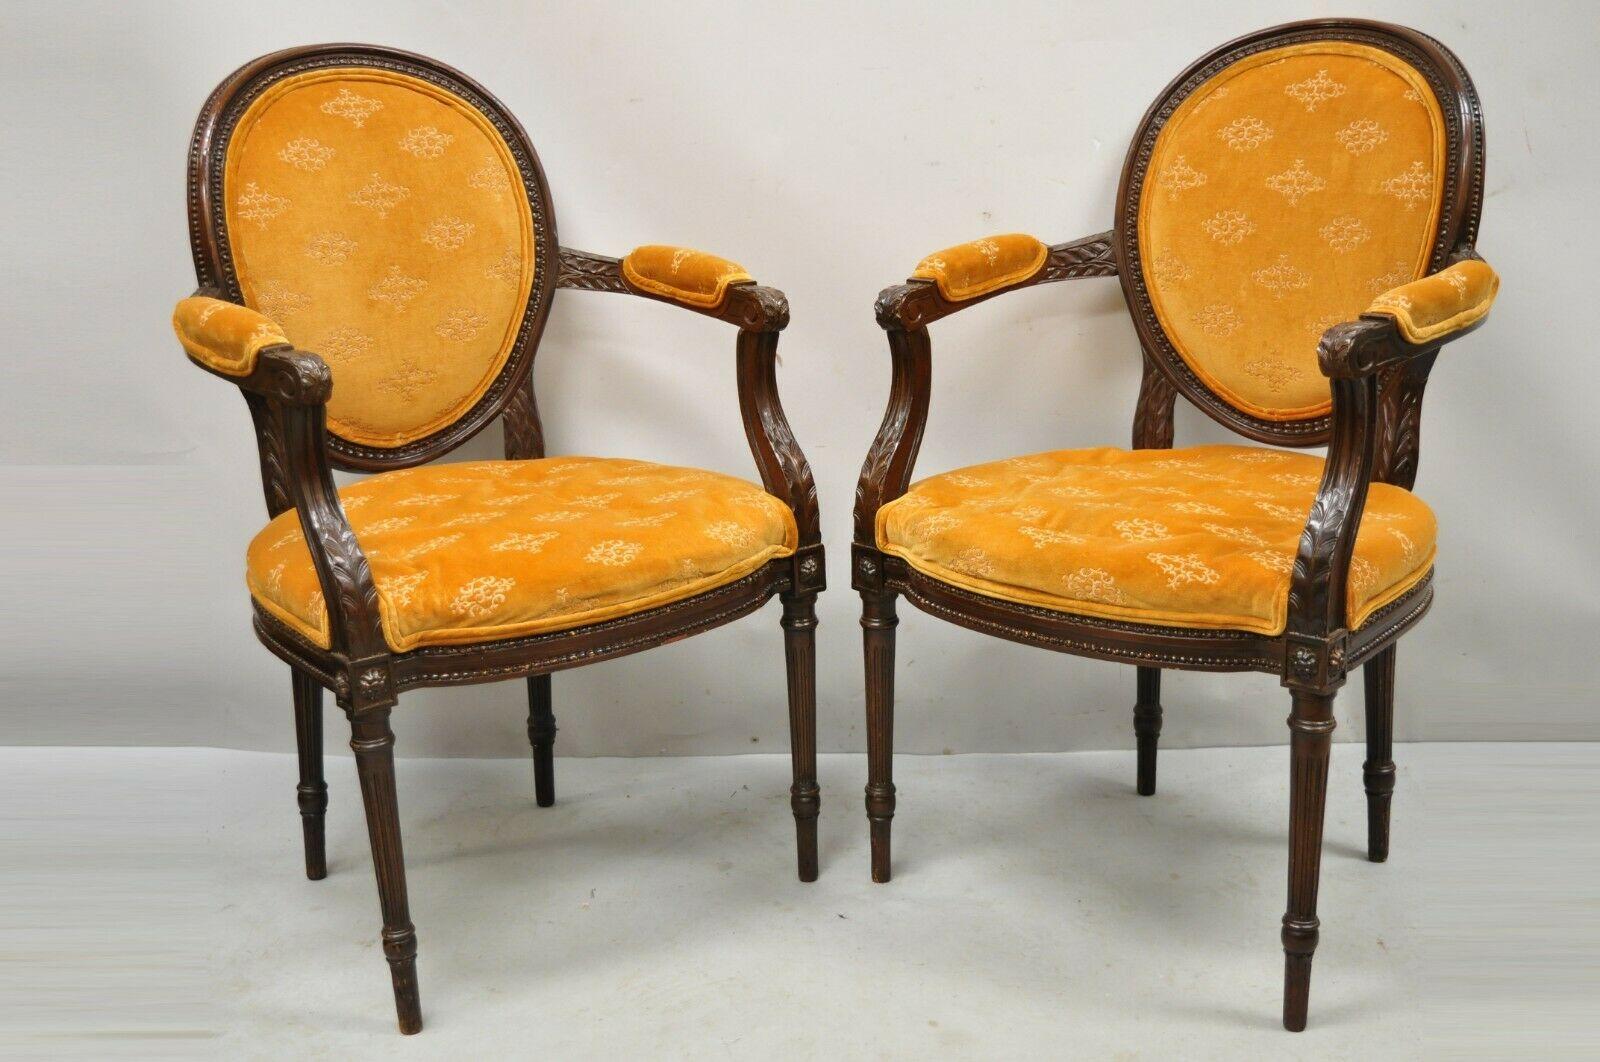 French Louis XVI Style Upholstered Oval Back Dining Arm Chairs - a Pair. Item features upholstered and carved oval backs, solid wood frames, upholstered armrests, nicely carved details, tapered legs, great style and form. Circa Mid 20th Century.